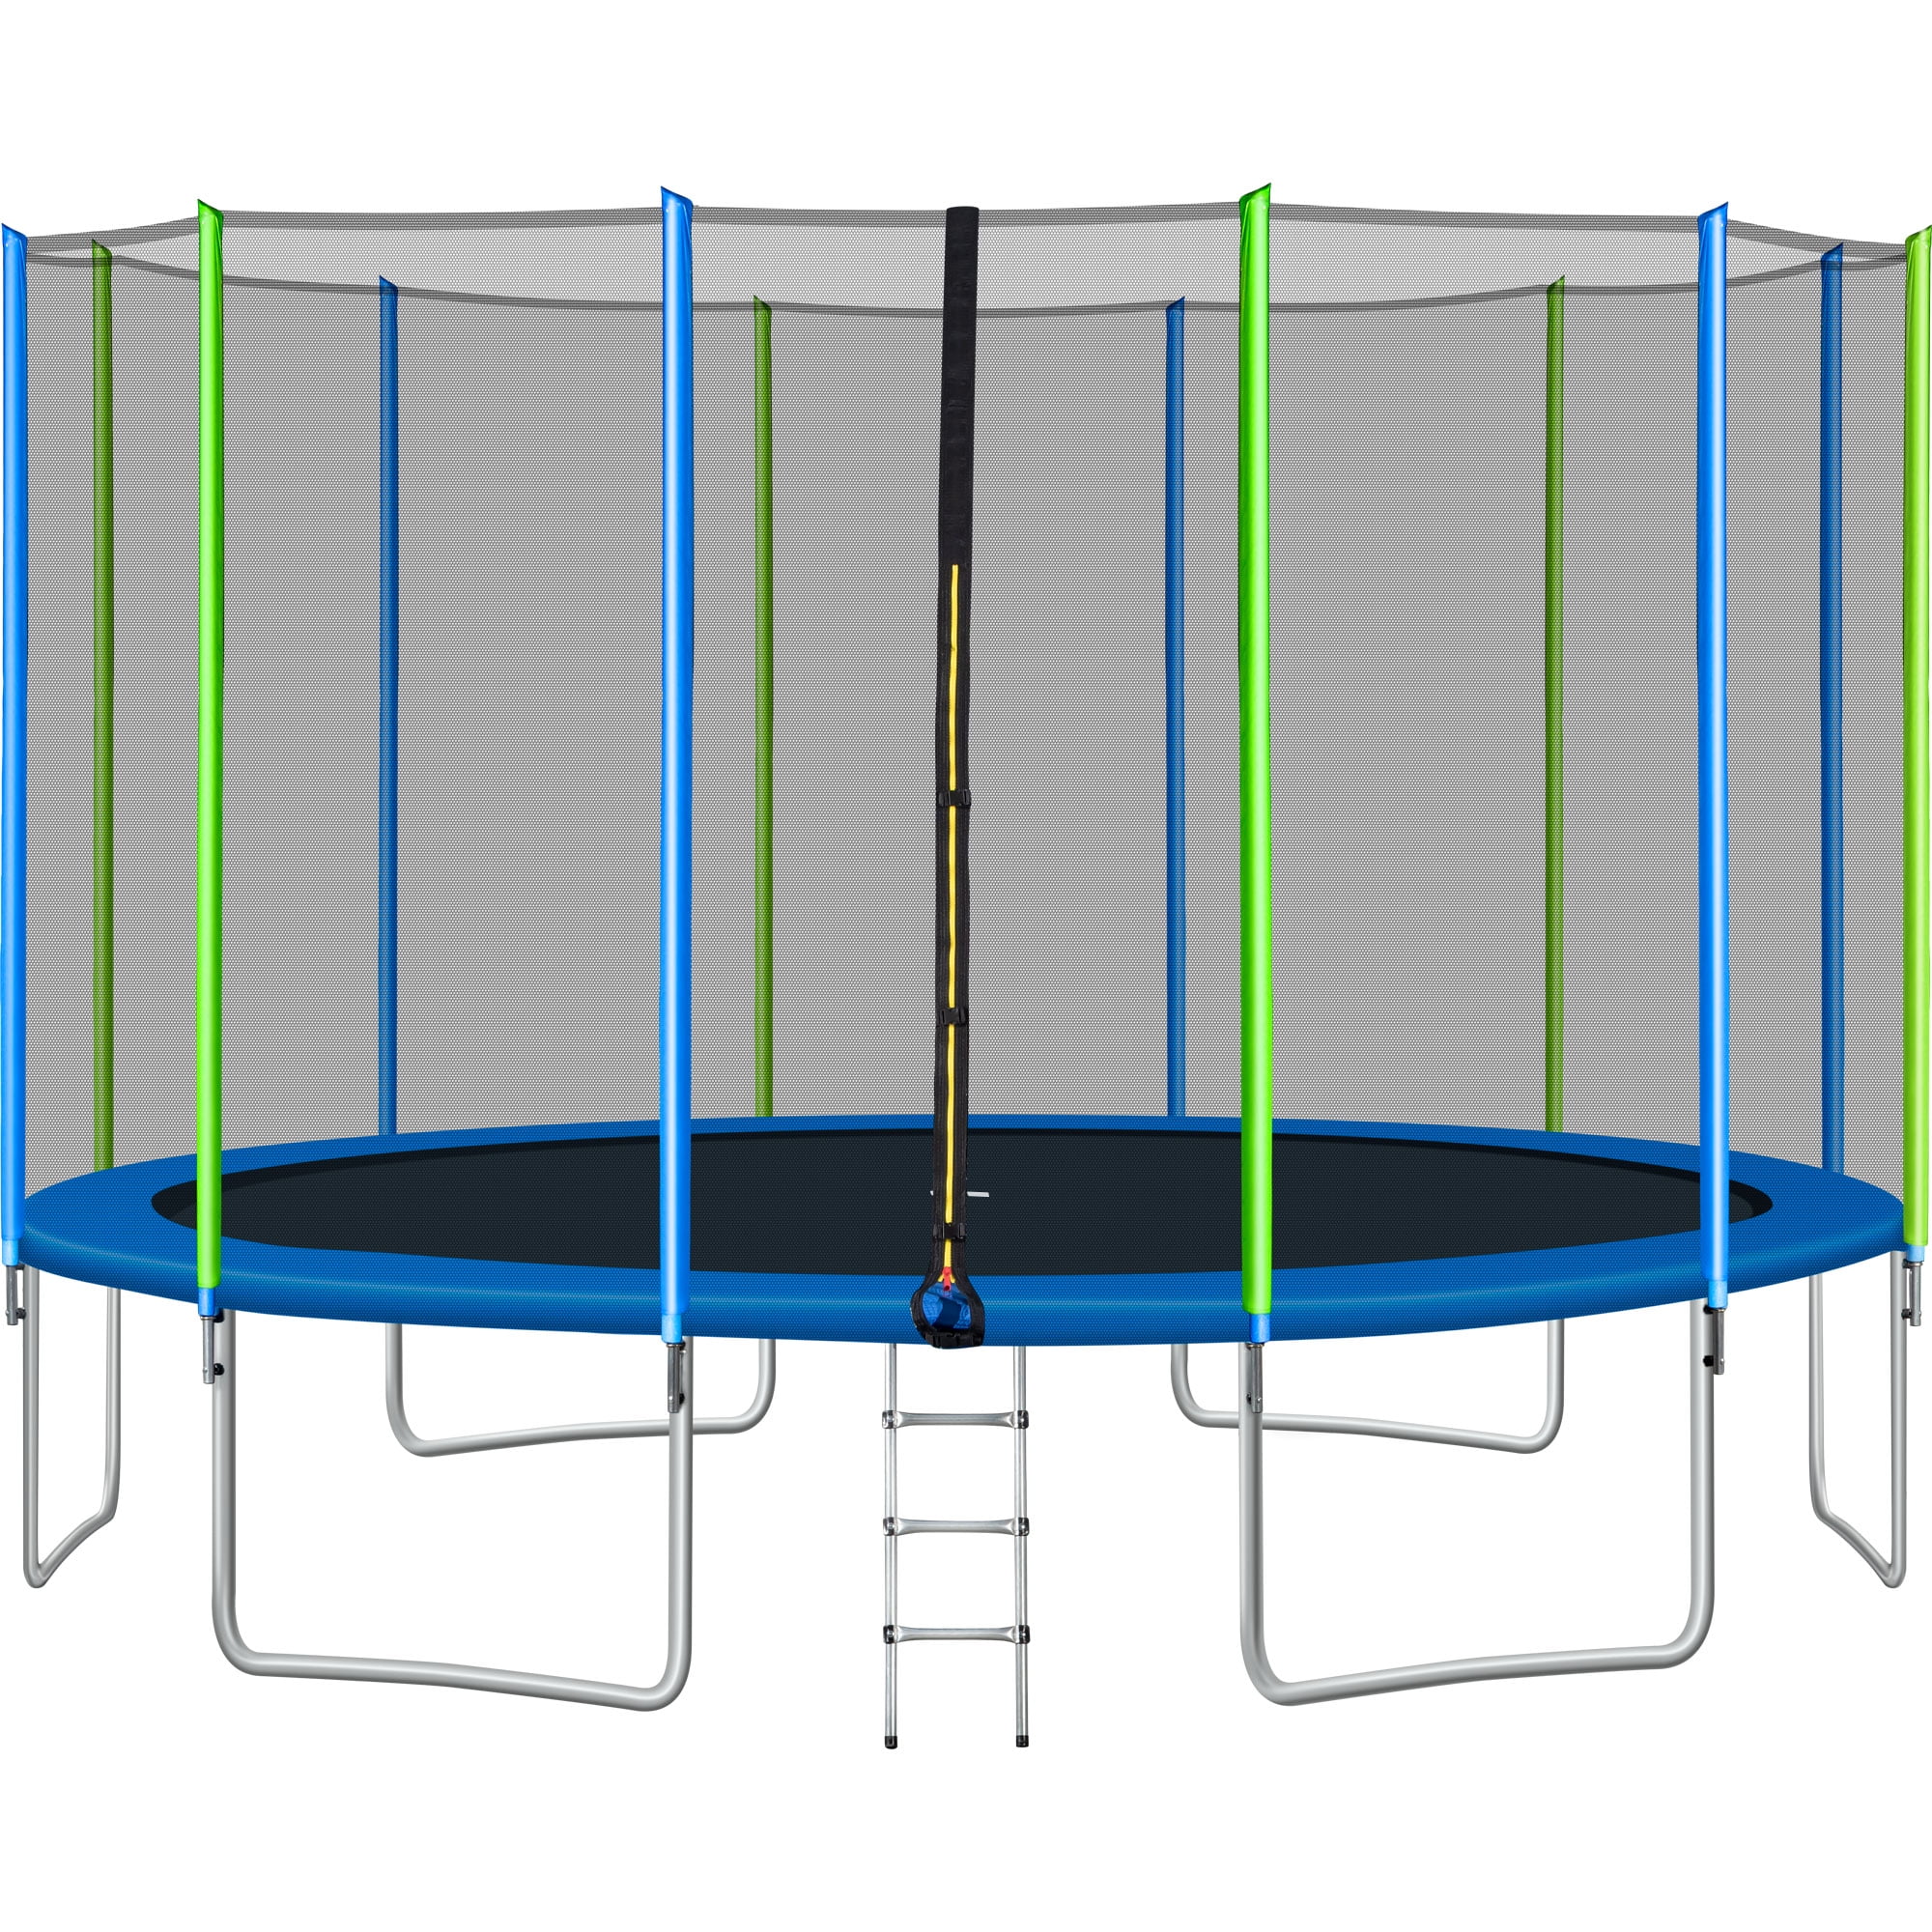 Tomshine 16FT Trampoline for Kids with Safety Enclosure Net, Ladder and 12 Wind Stakes, Round Outdoor Recreational Trampoline